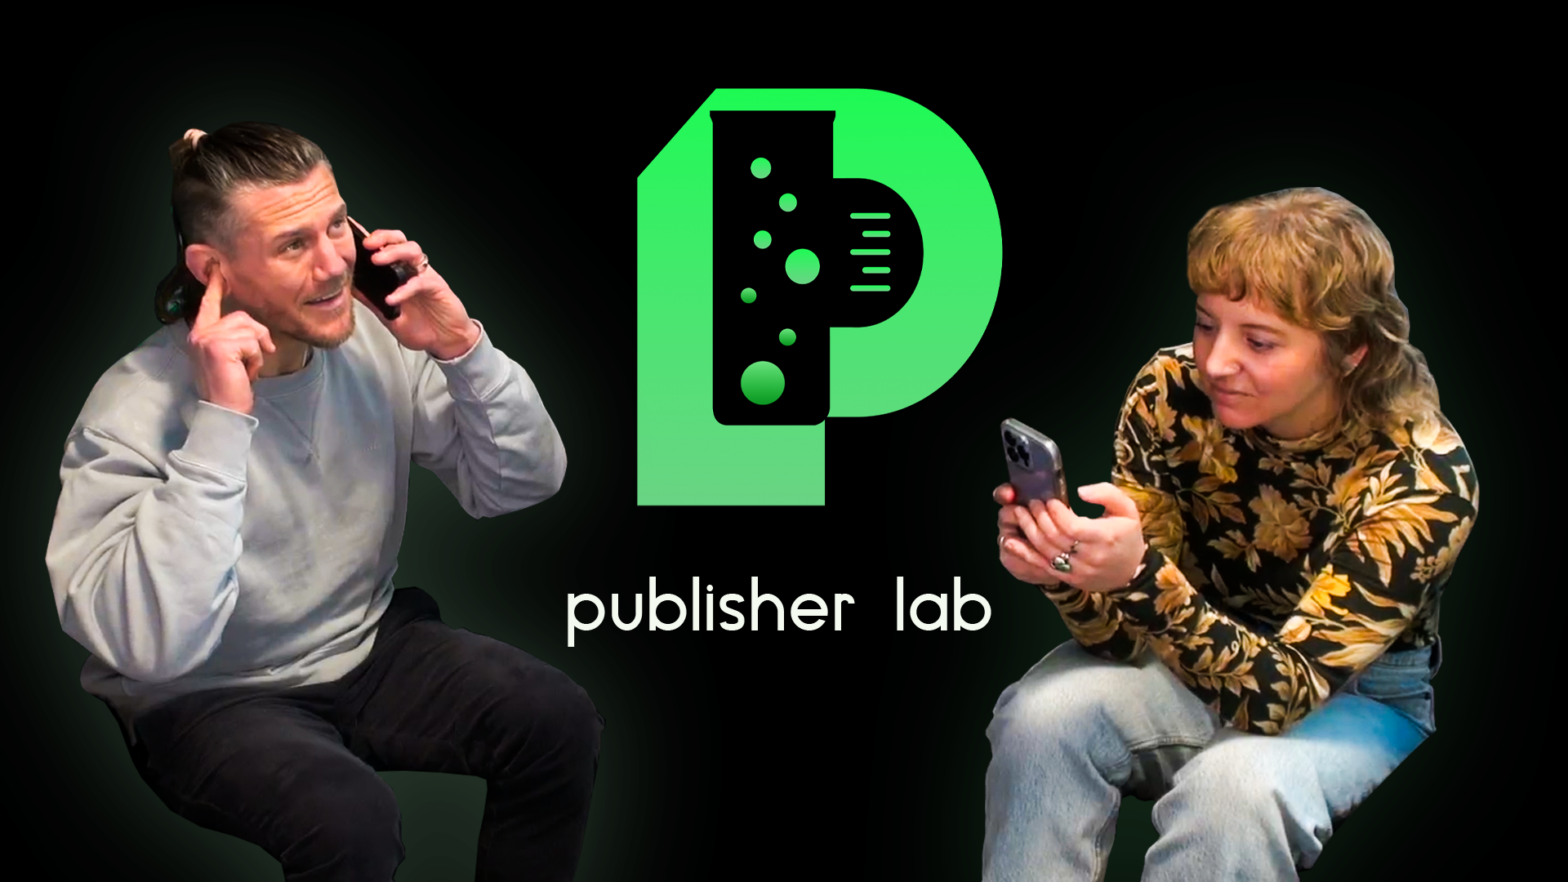 tyler bishop and whitney wrigh the publisher lab thumbnail